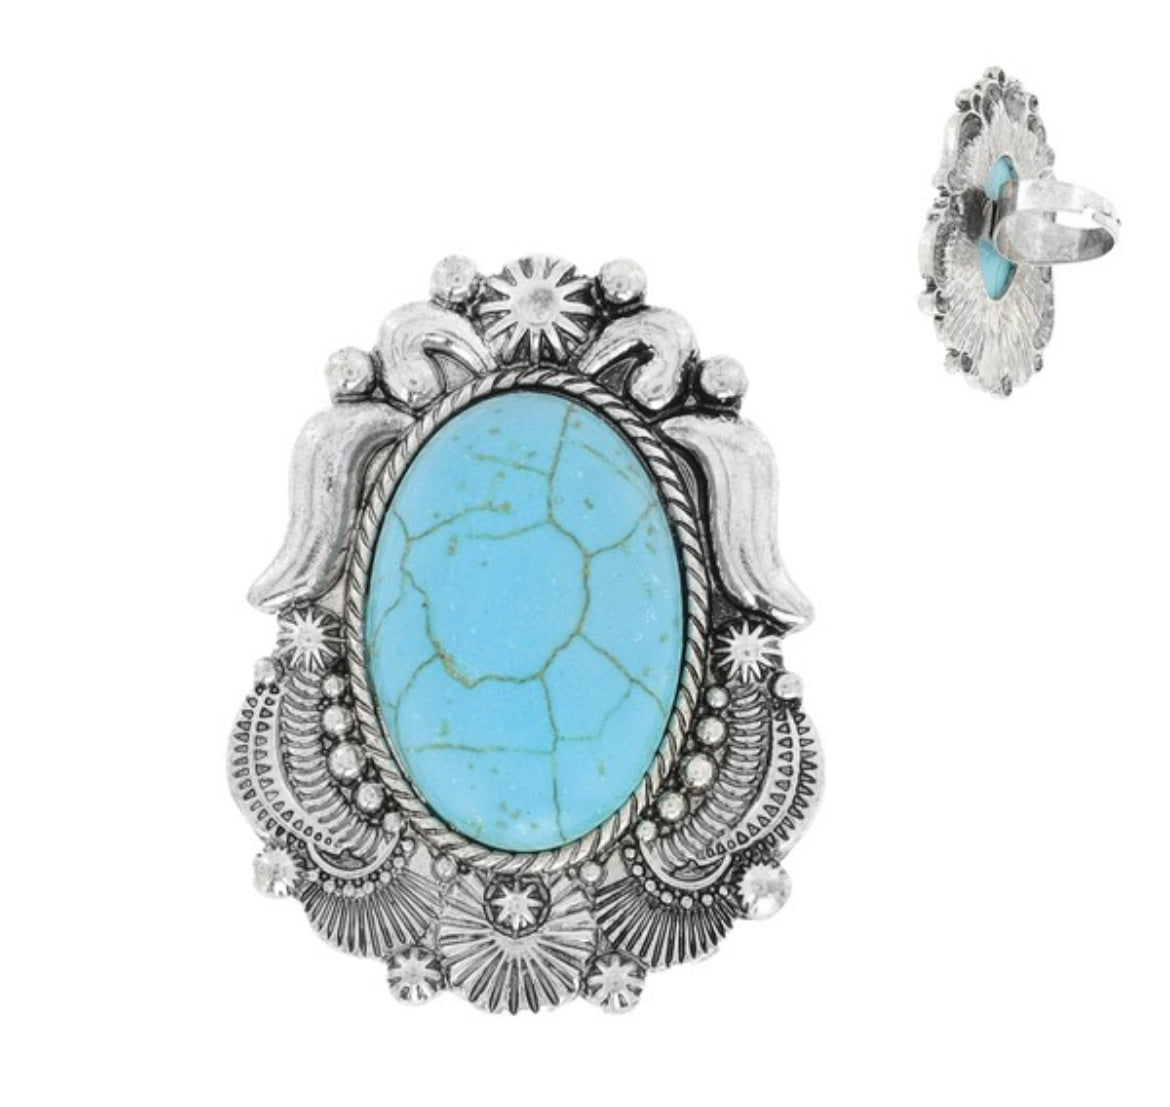 Fat Bottom Turquoise ring